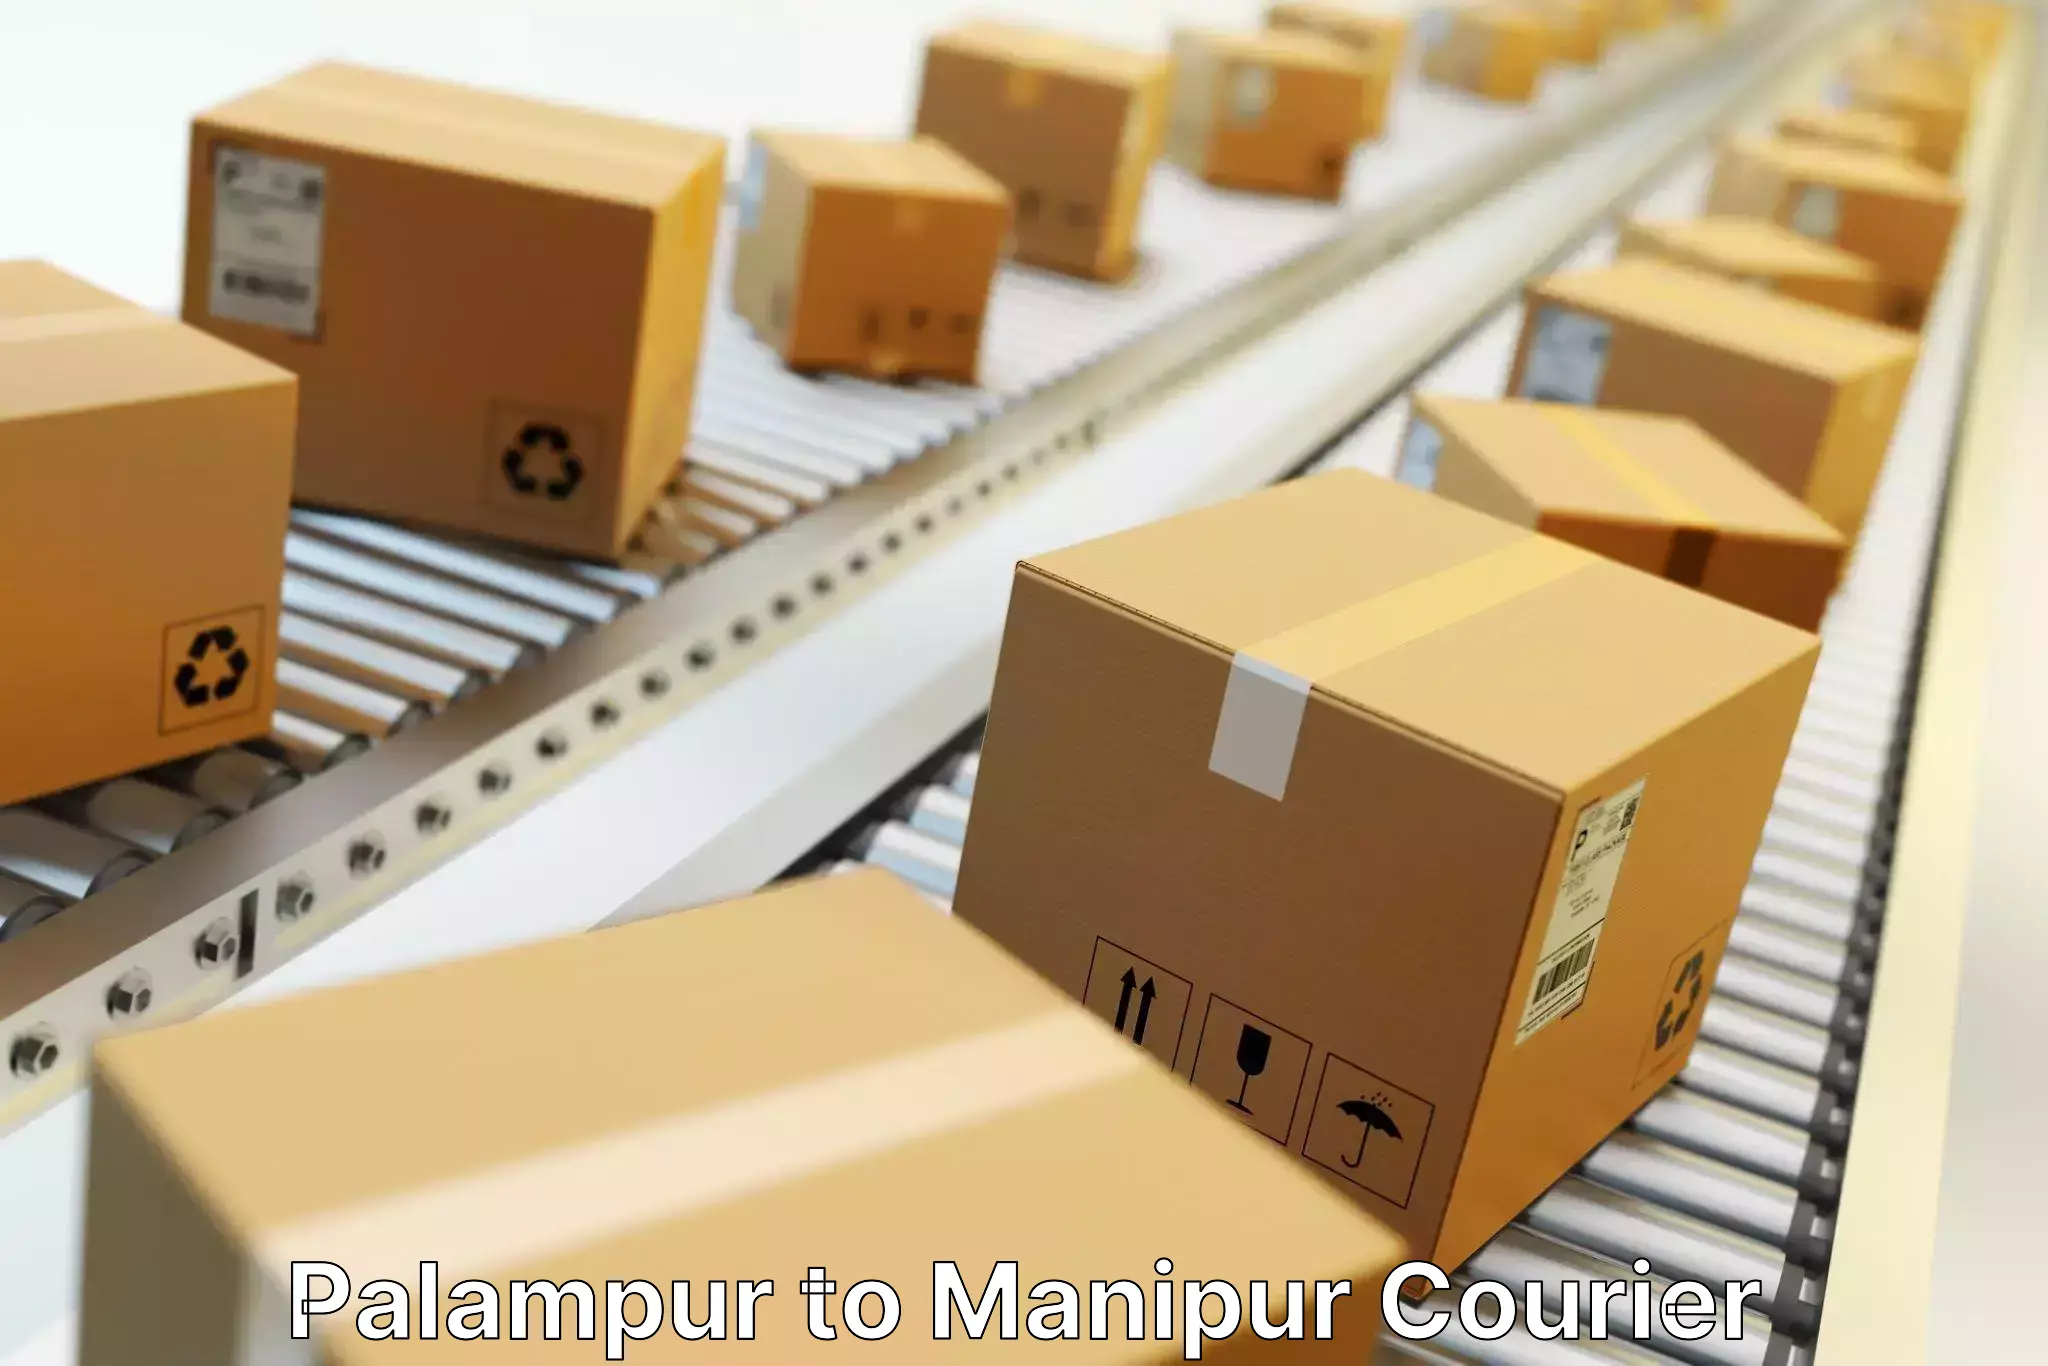 Flexible delivery scheduling Palampur to Imphal